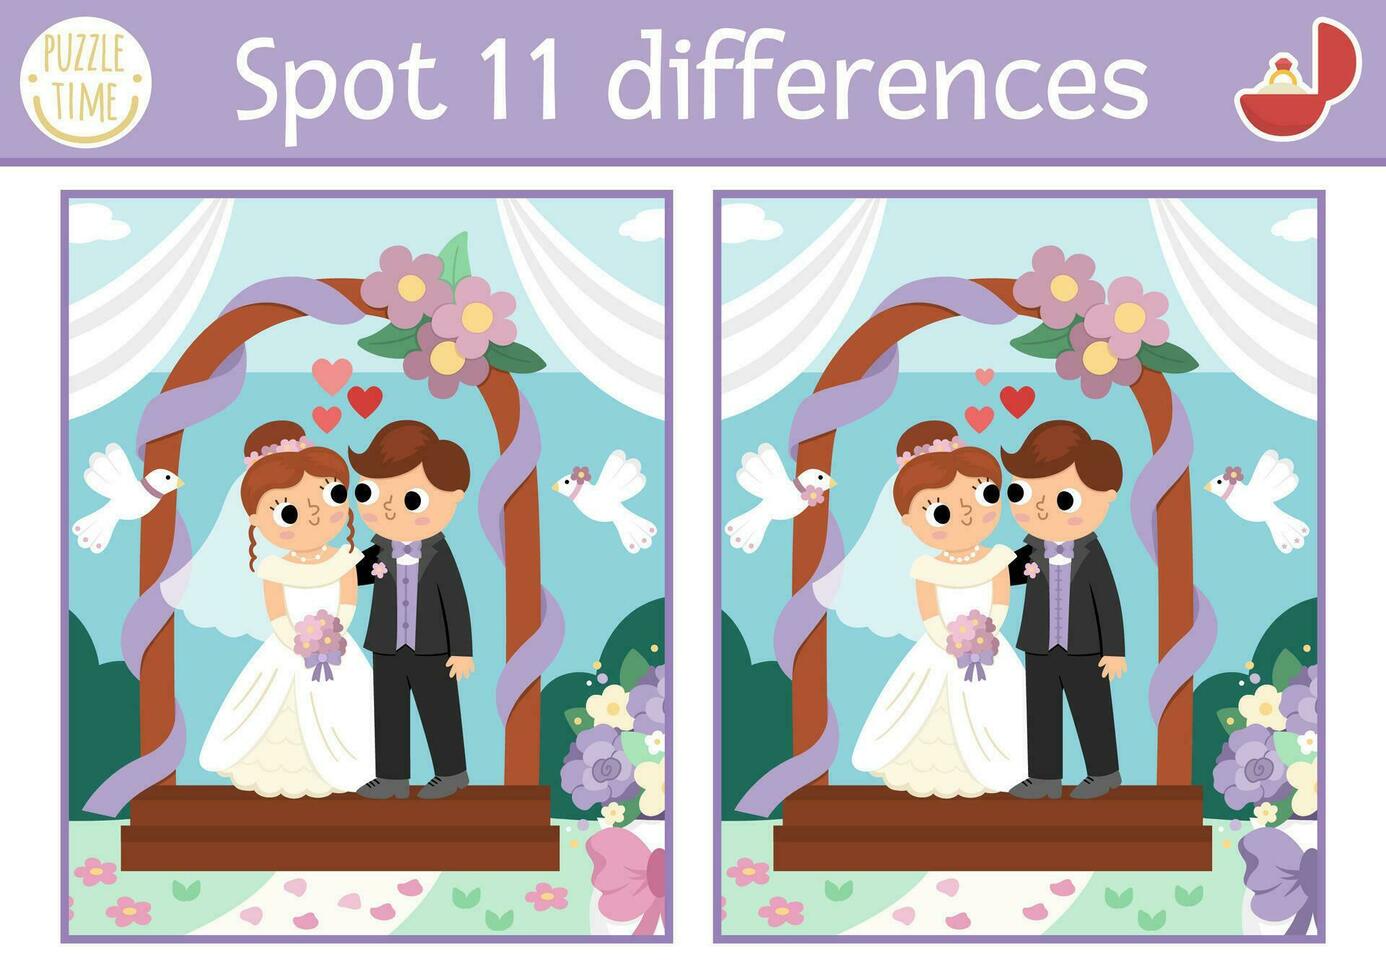 Find differences game for children. Wedding educational activity with cute married couple. Marriage ceremony puzzle for kids with funny bride, groom and arch. Printable worksheet or page vector